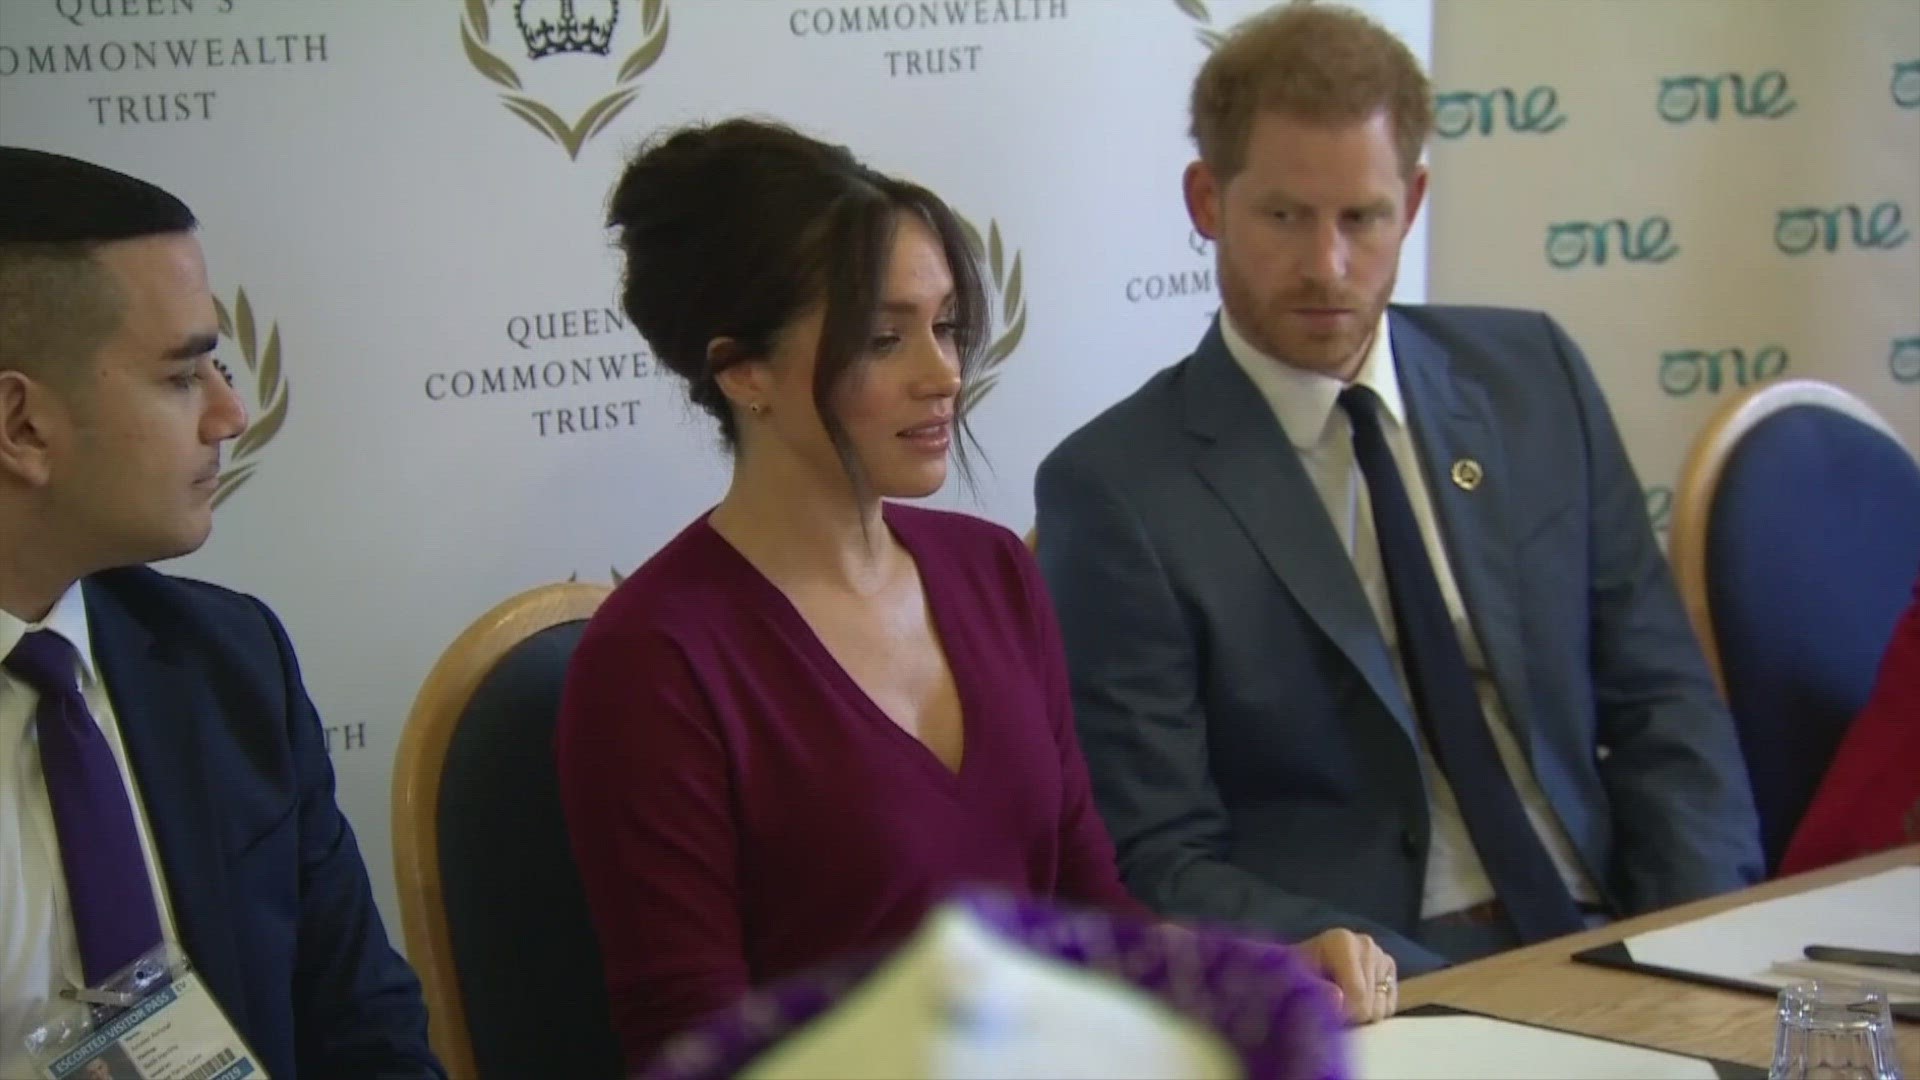 Will Prince Harry start a career in Hollywood like his wife, actress Meghan Markle? Buzz60's Keri Lumm has more.